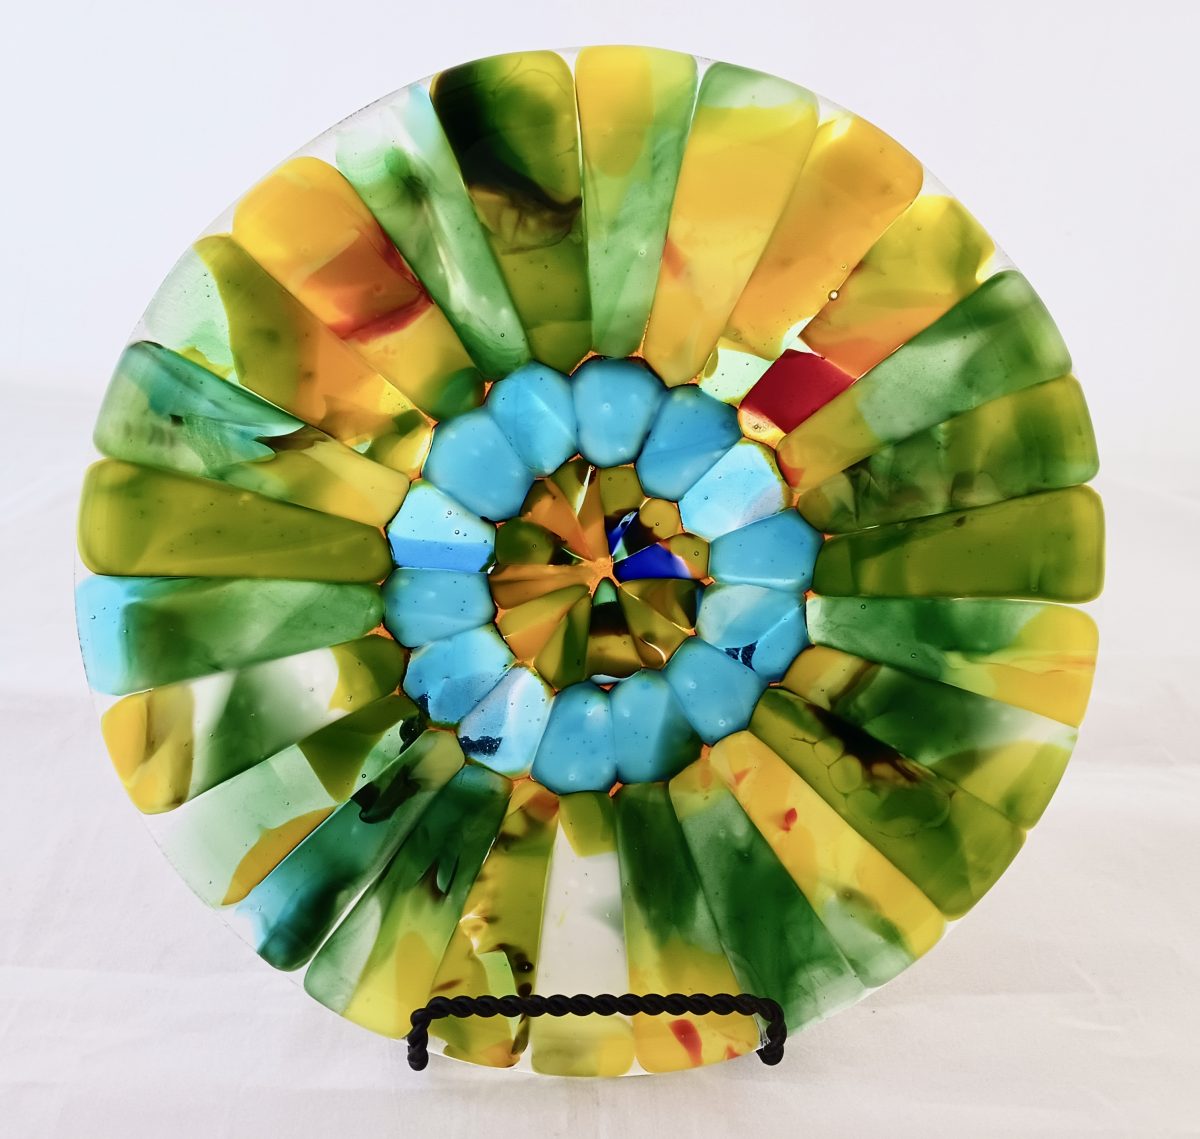 Caron Art Glass Michelle Caron fused glass hand raked glass plate zinnia amber green turquoise round